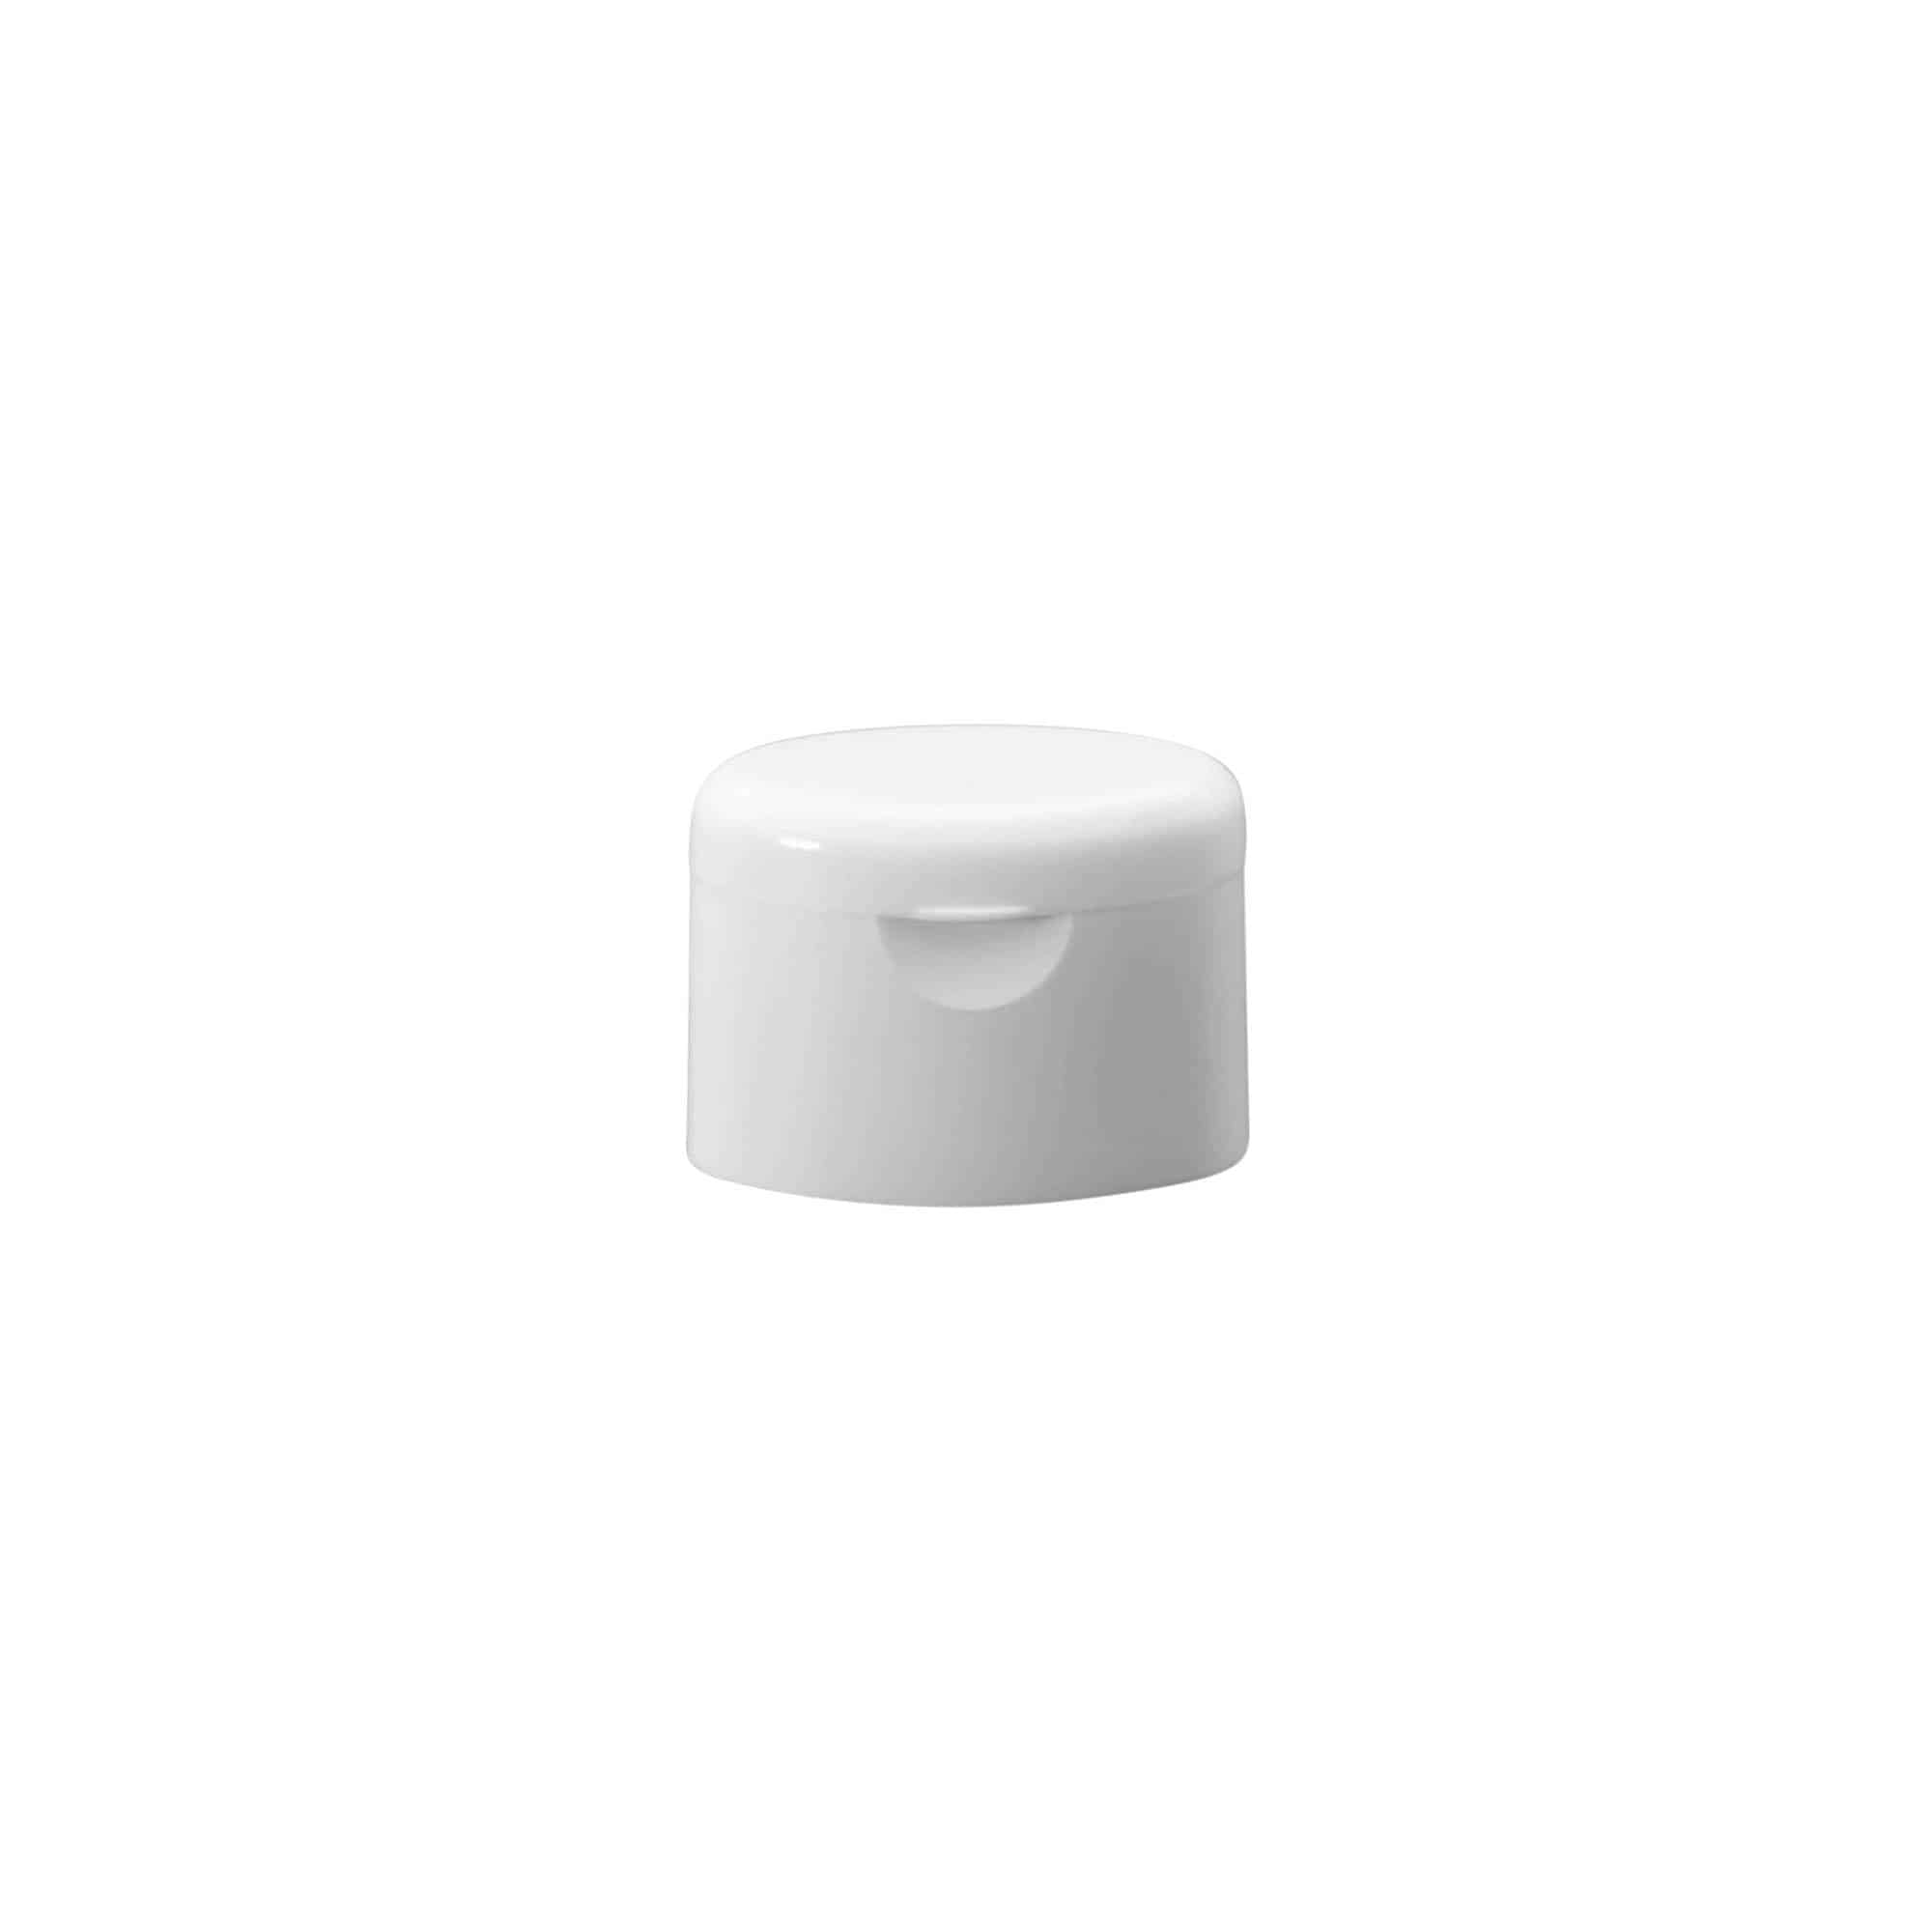 Hinged screw cap for 'Indy', plastic, white